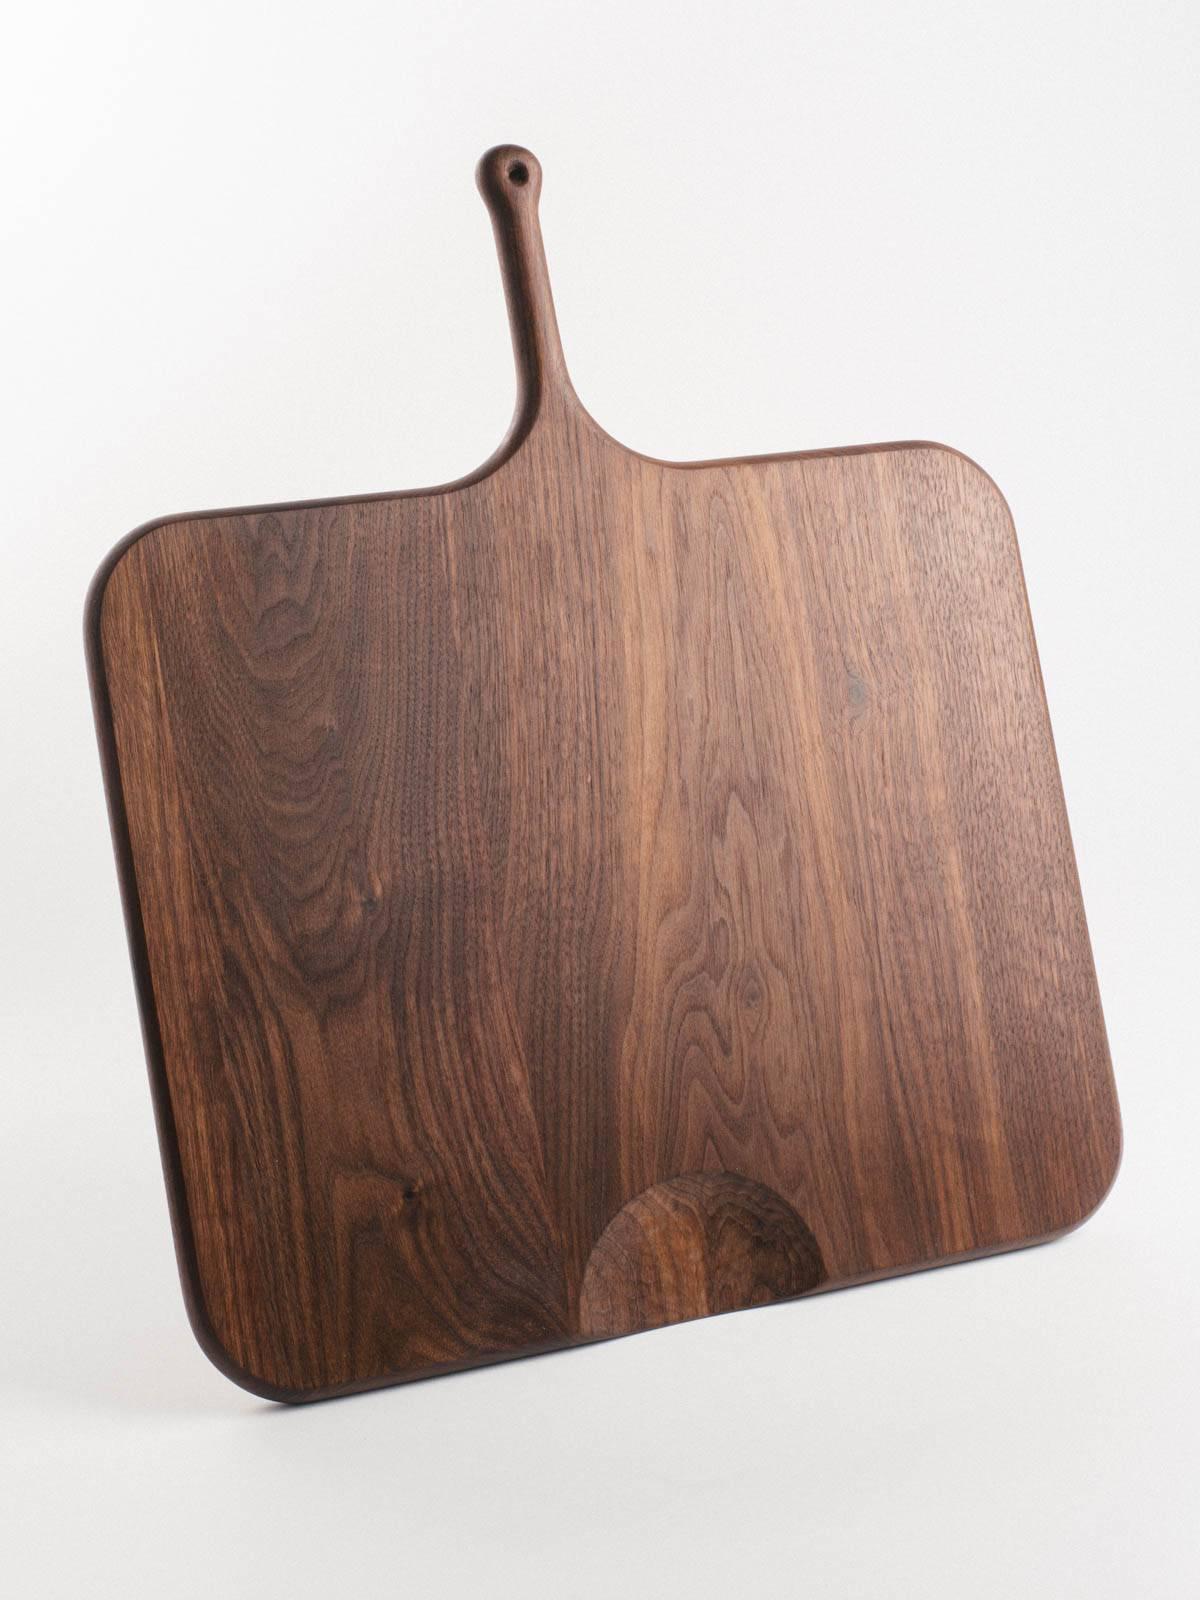 Our serving boards are elegantly shaped with a soft feel. Handles are ideally sized for the palm and include a leather bootlace hanging loop. Half-moon cut-outs serve as a second handle or to direct chopped fare. Each board is shaped, seasoned, and